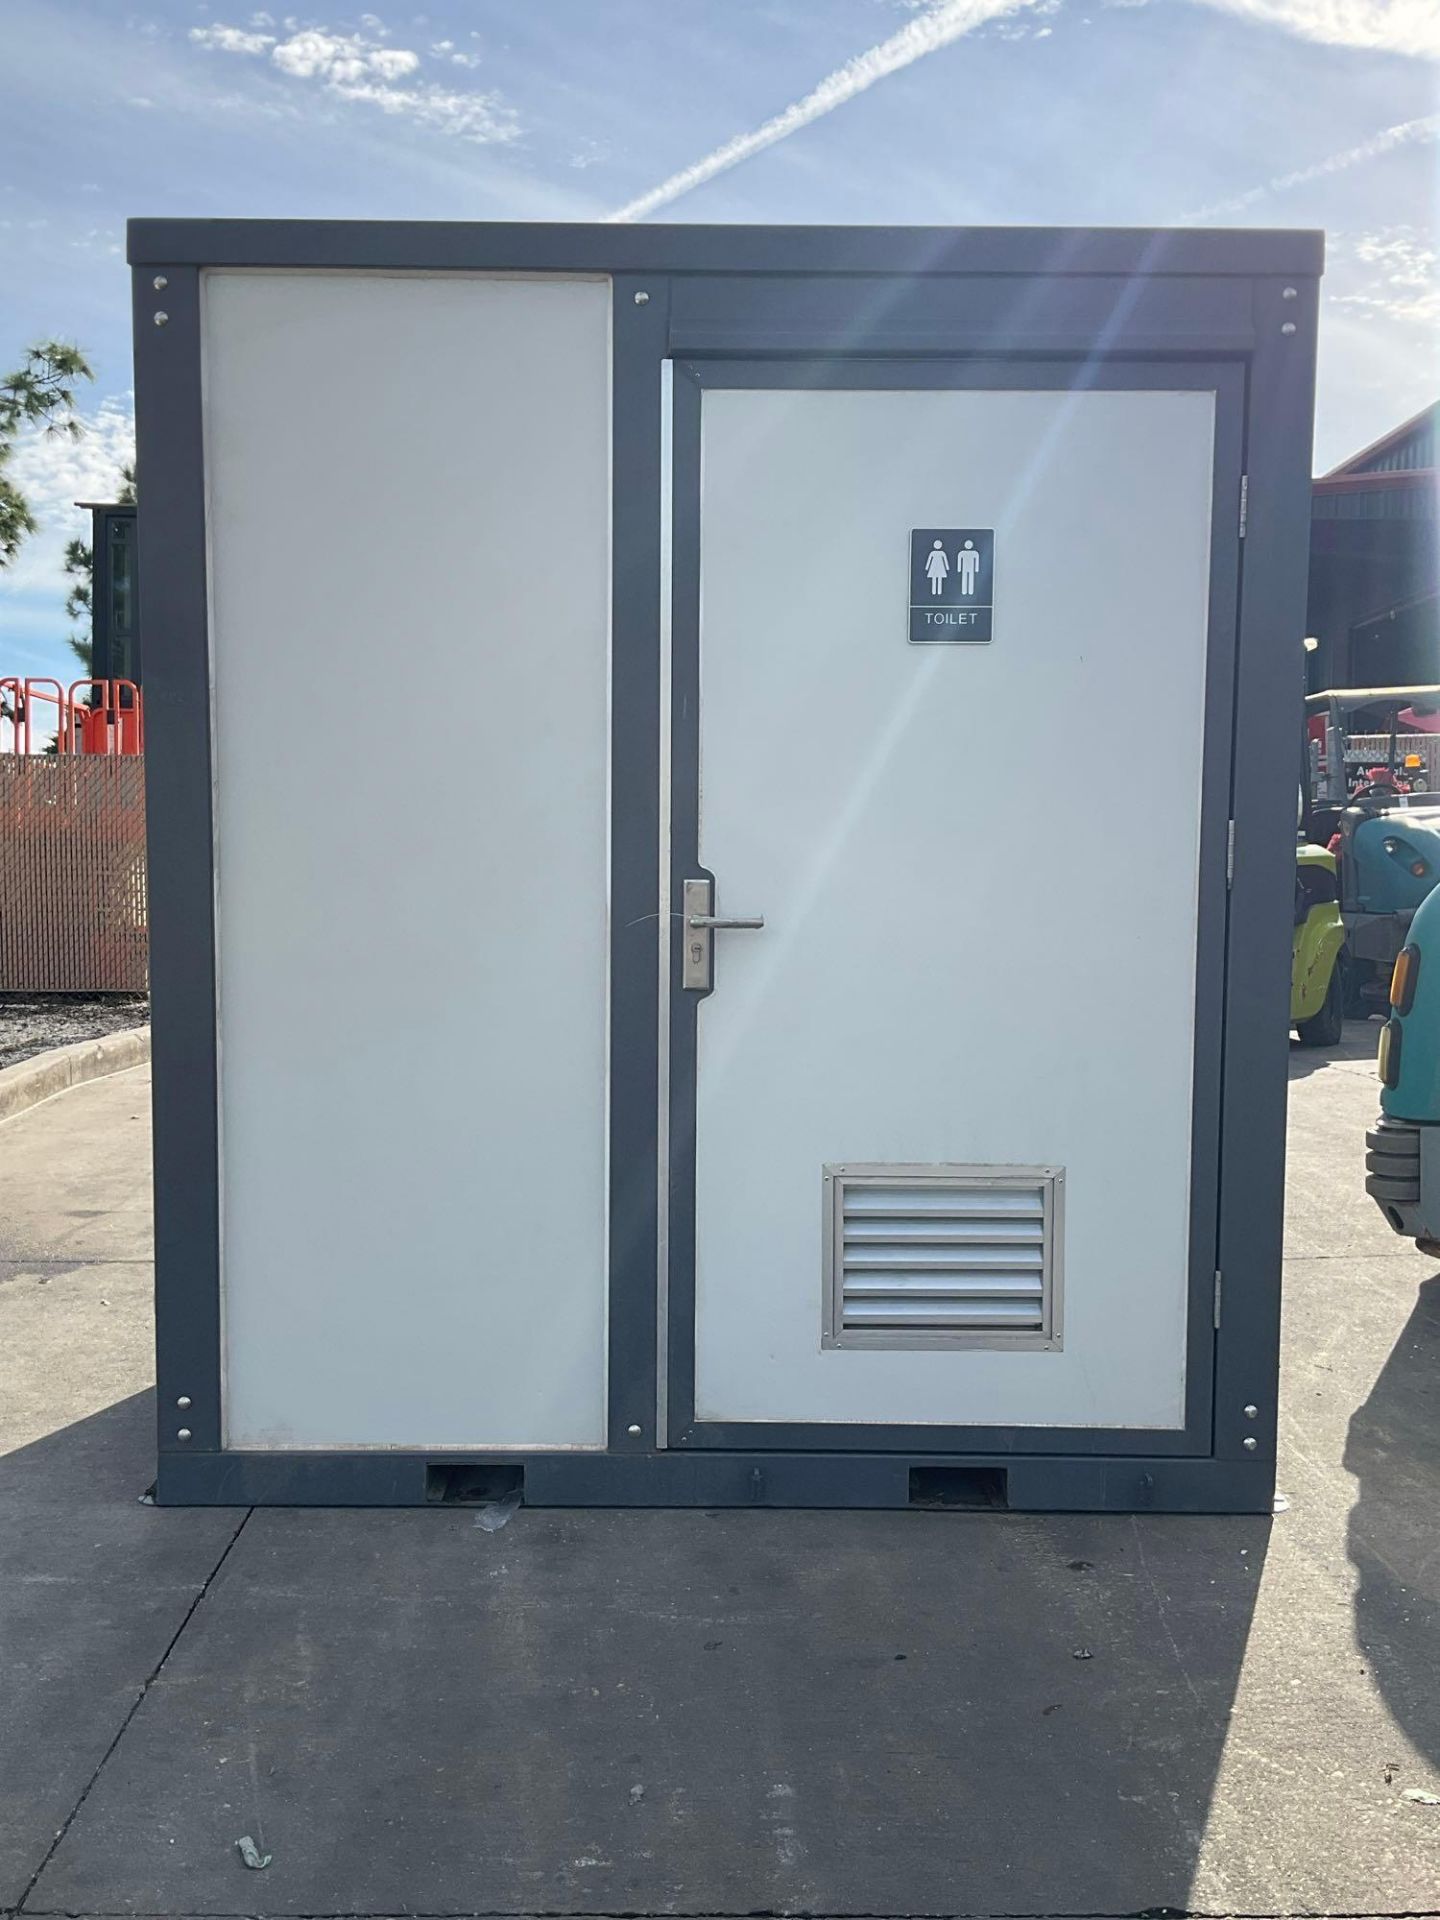 UNUSED PORTABLE BATHROOM UNIT WITH RAMP/HANDICAP ACCESSIBLE, ELECTRIC & PLUMBING HOOK UP WITH - Image 10 of 18